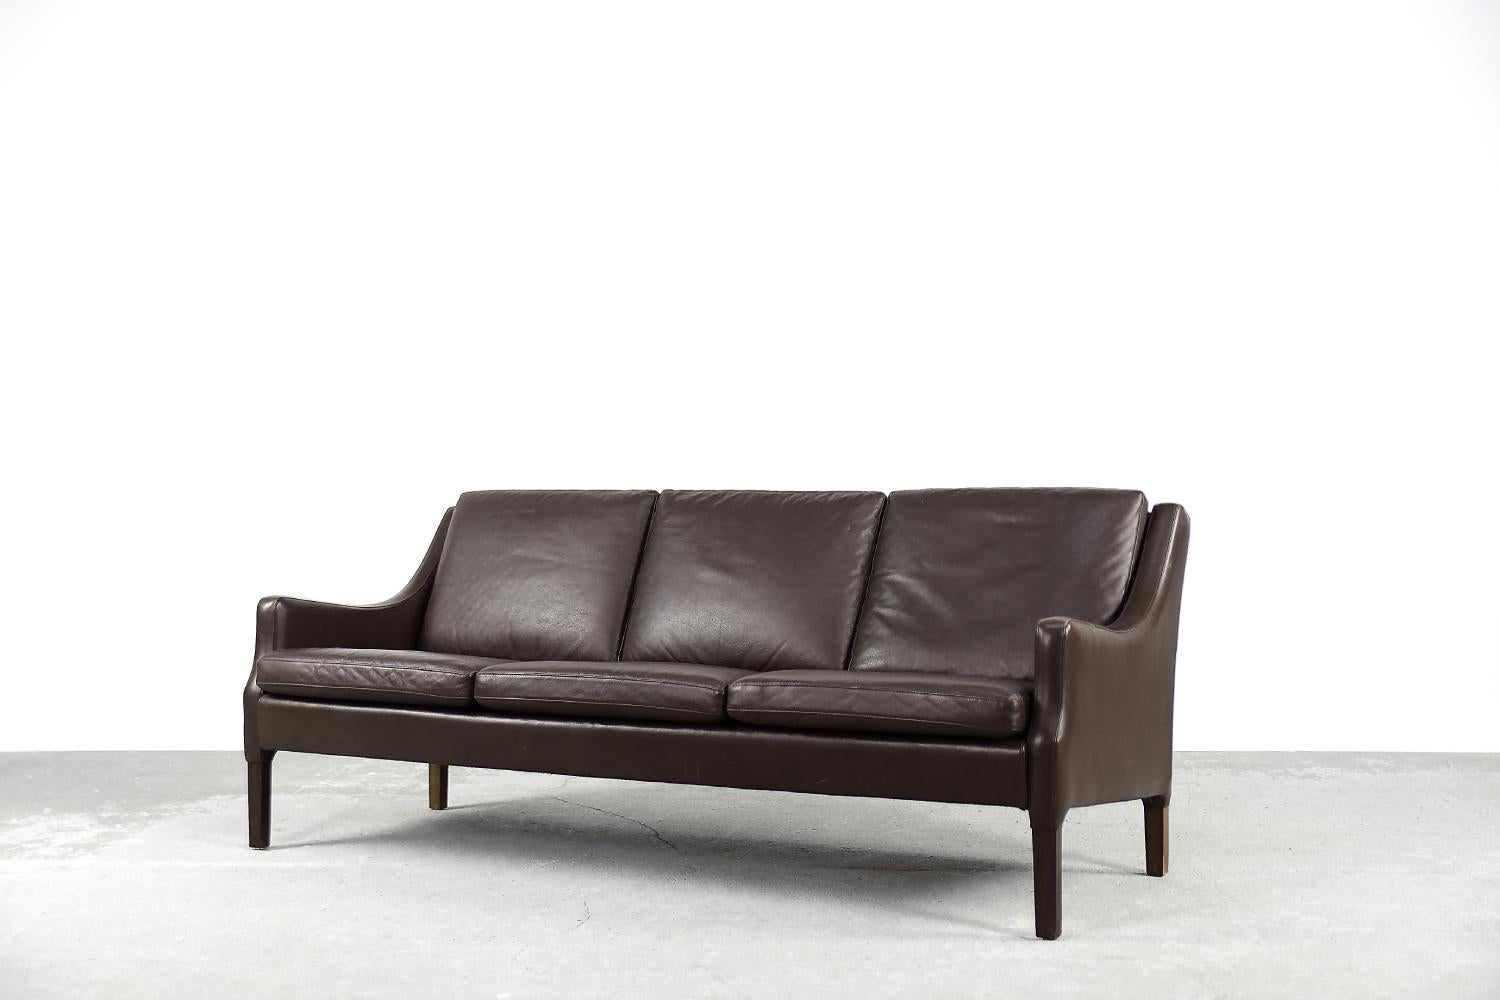 Rare Mid-Century Modern Vintage Danish 3-seater Chocolate Leather Sofa, 1960s In Good Condition For Sale In Warszawa, Mazowieckie